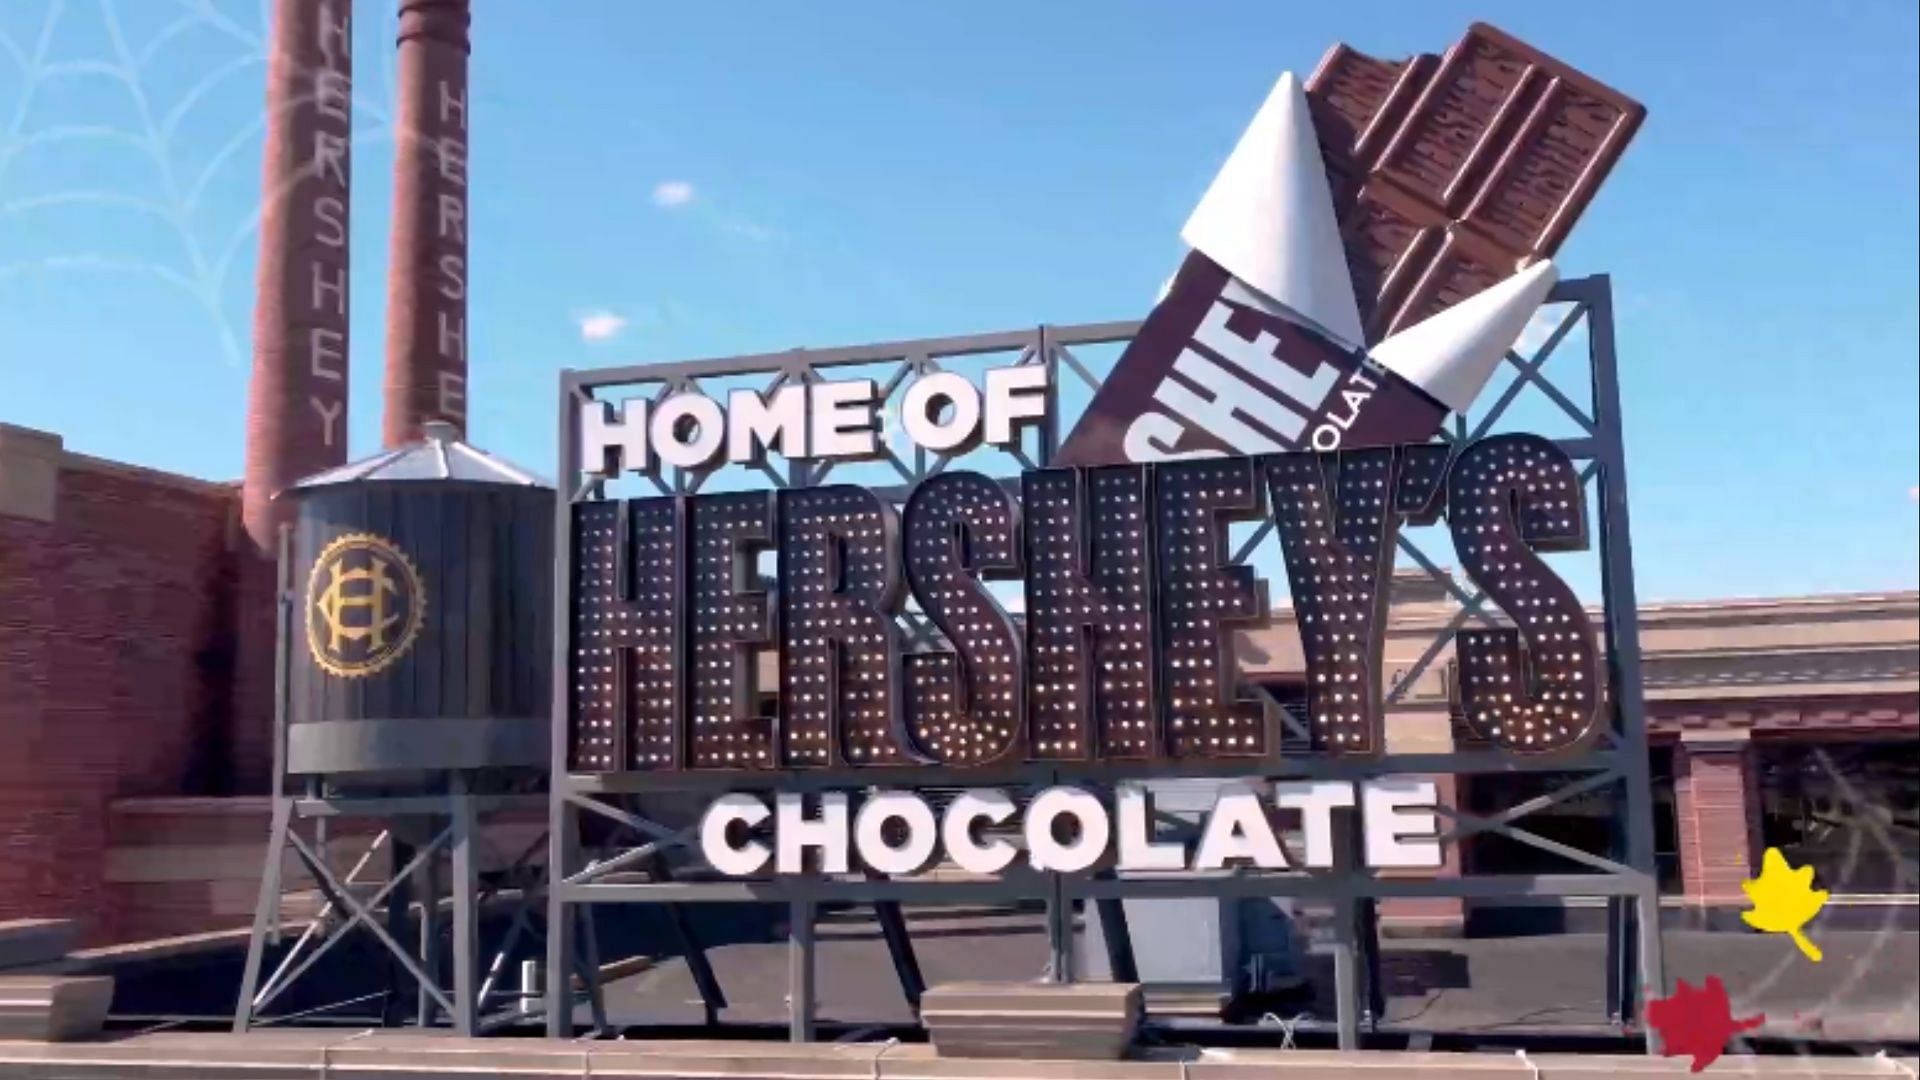 More than a dozen of the tested chocolate products including Hershey&#039;s contained higher levels of heavy metals (Image via H.)